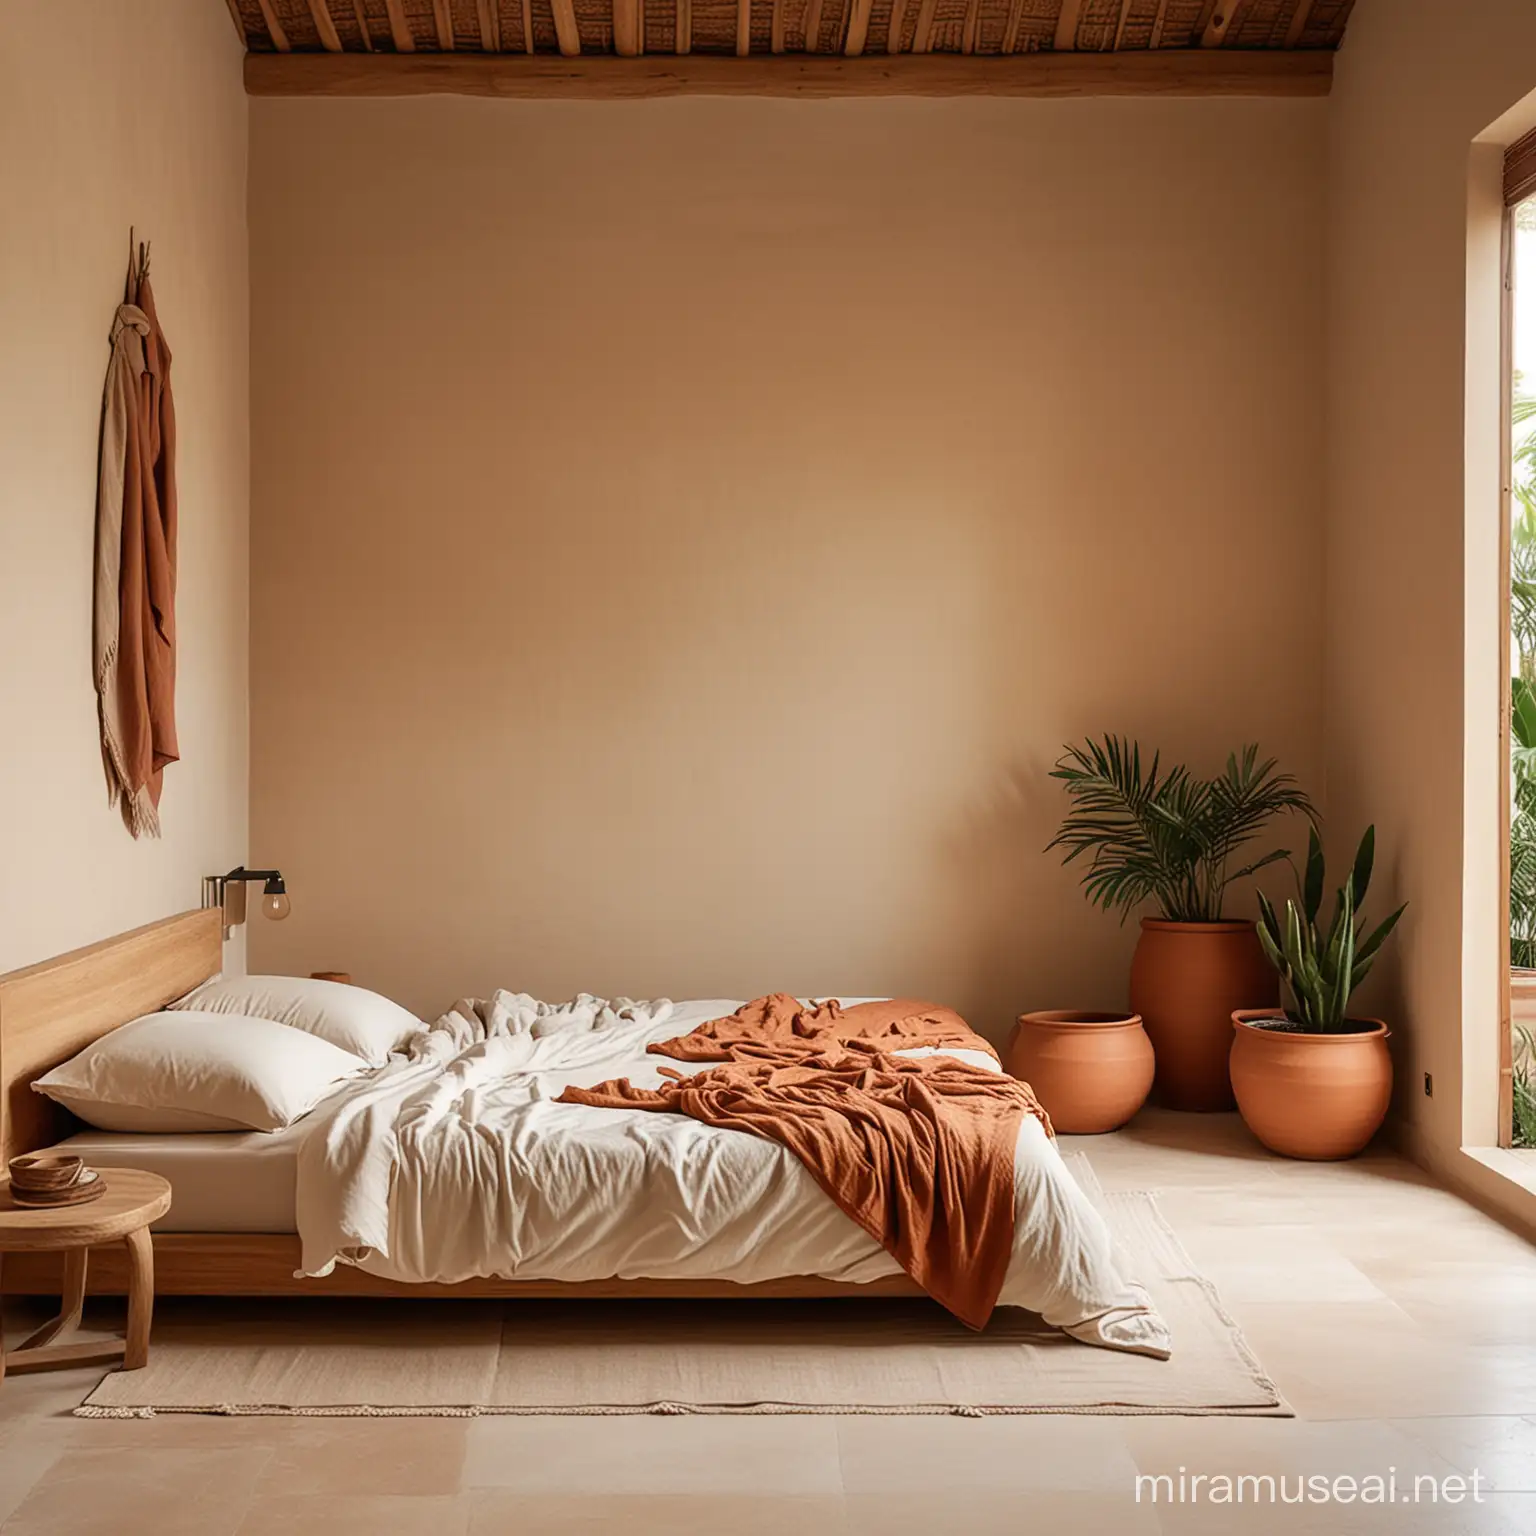 A minimal interior bedroom, stone floor, Bali style, terracotta vessel in the room, beige and cream color bedsheets, cream color wall, 